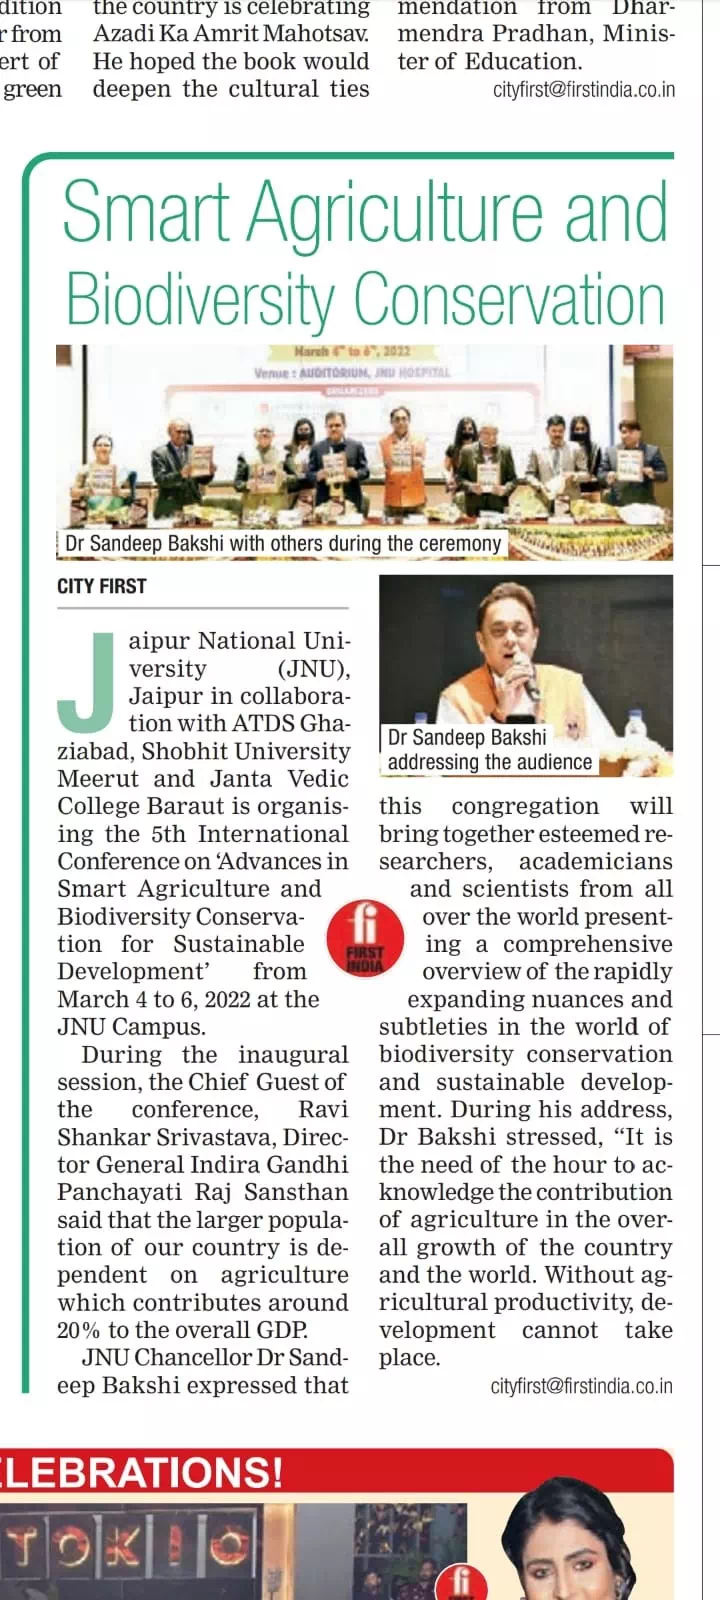 Inaugural session of 5th International Conference on Advances on Smart Agriculture and Biodiversity for Sustainable Development 4to 6 March 2022